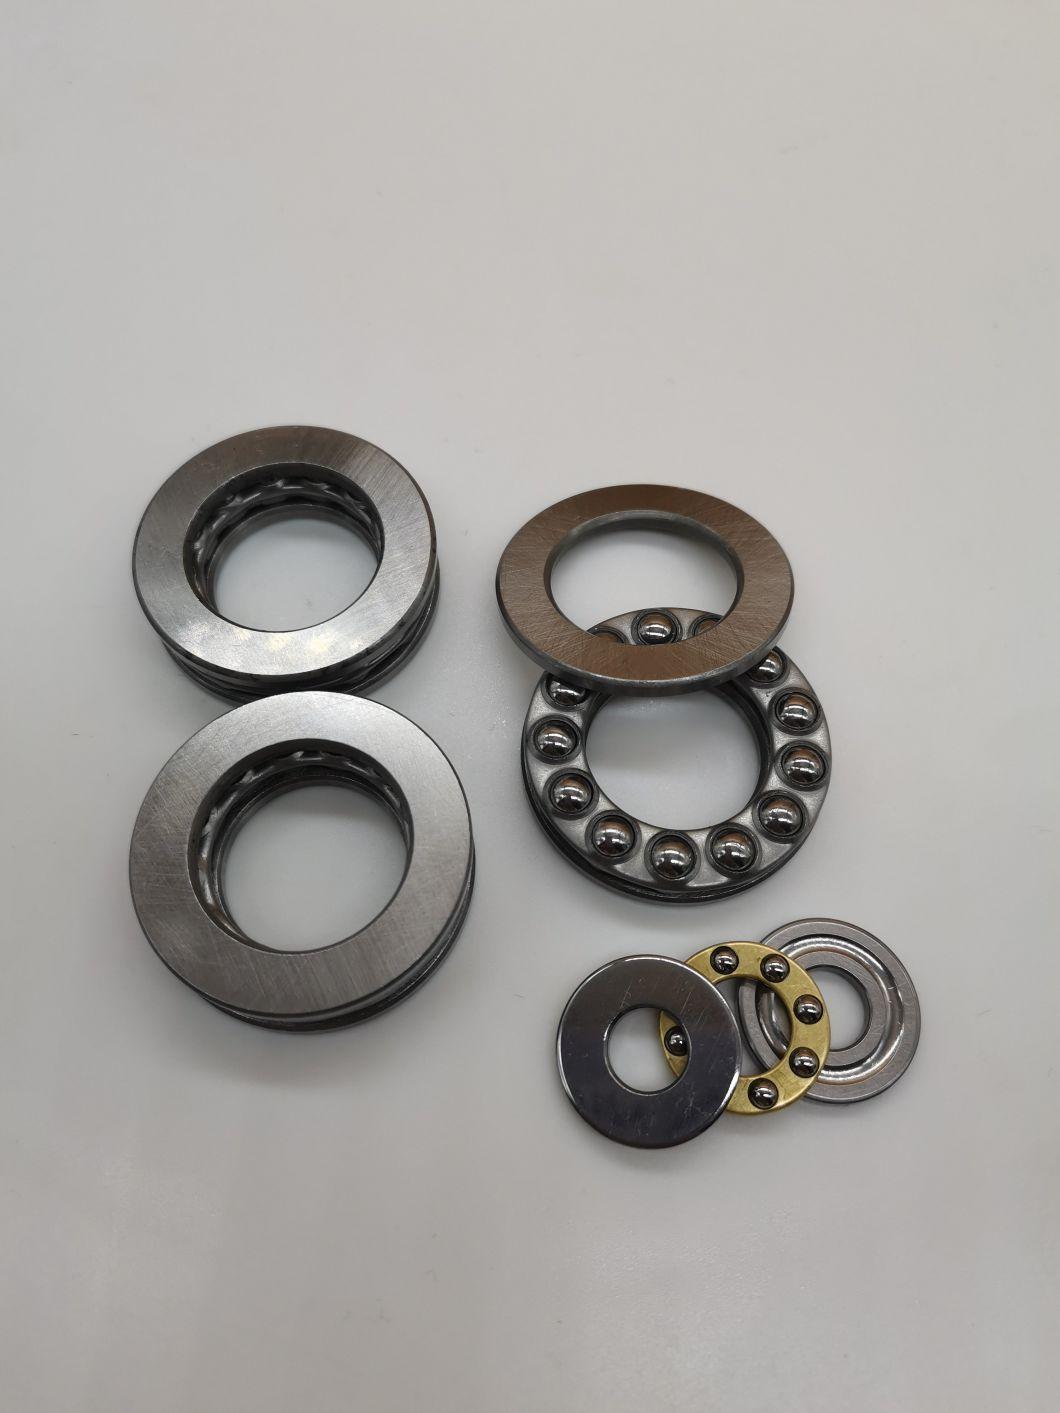 Unidirectional Thrust Ball Bearings/Low Speed Reducer/Foda High Quality Bearings Instead of Koyo Bearings/Thrust Ball Bearings of 51409